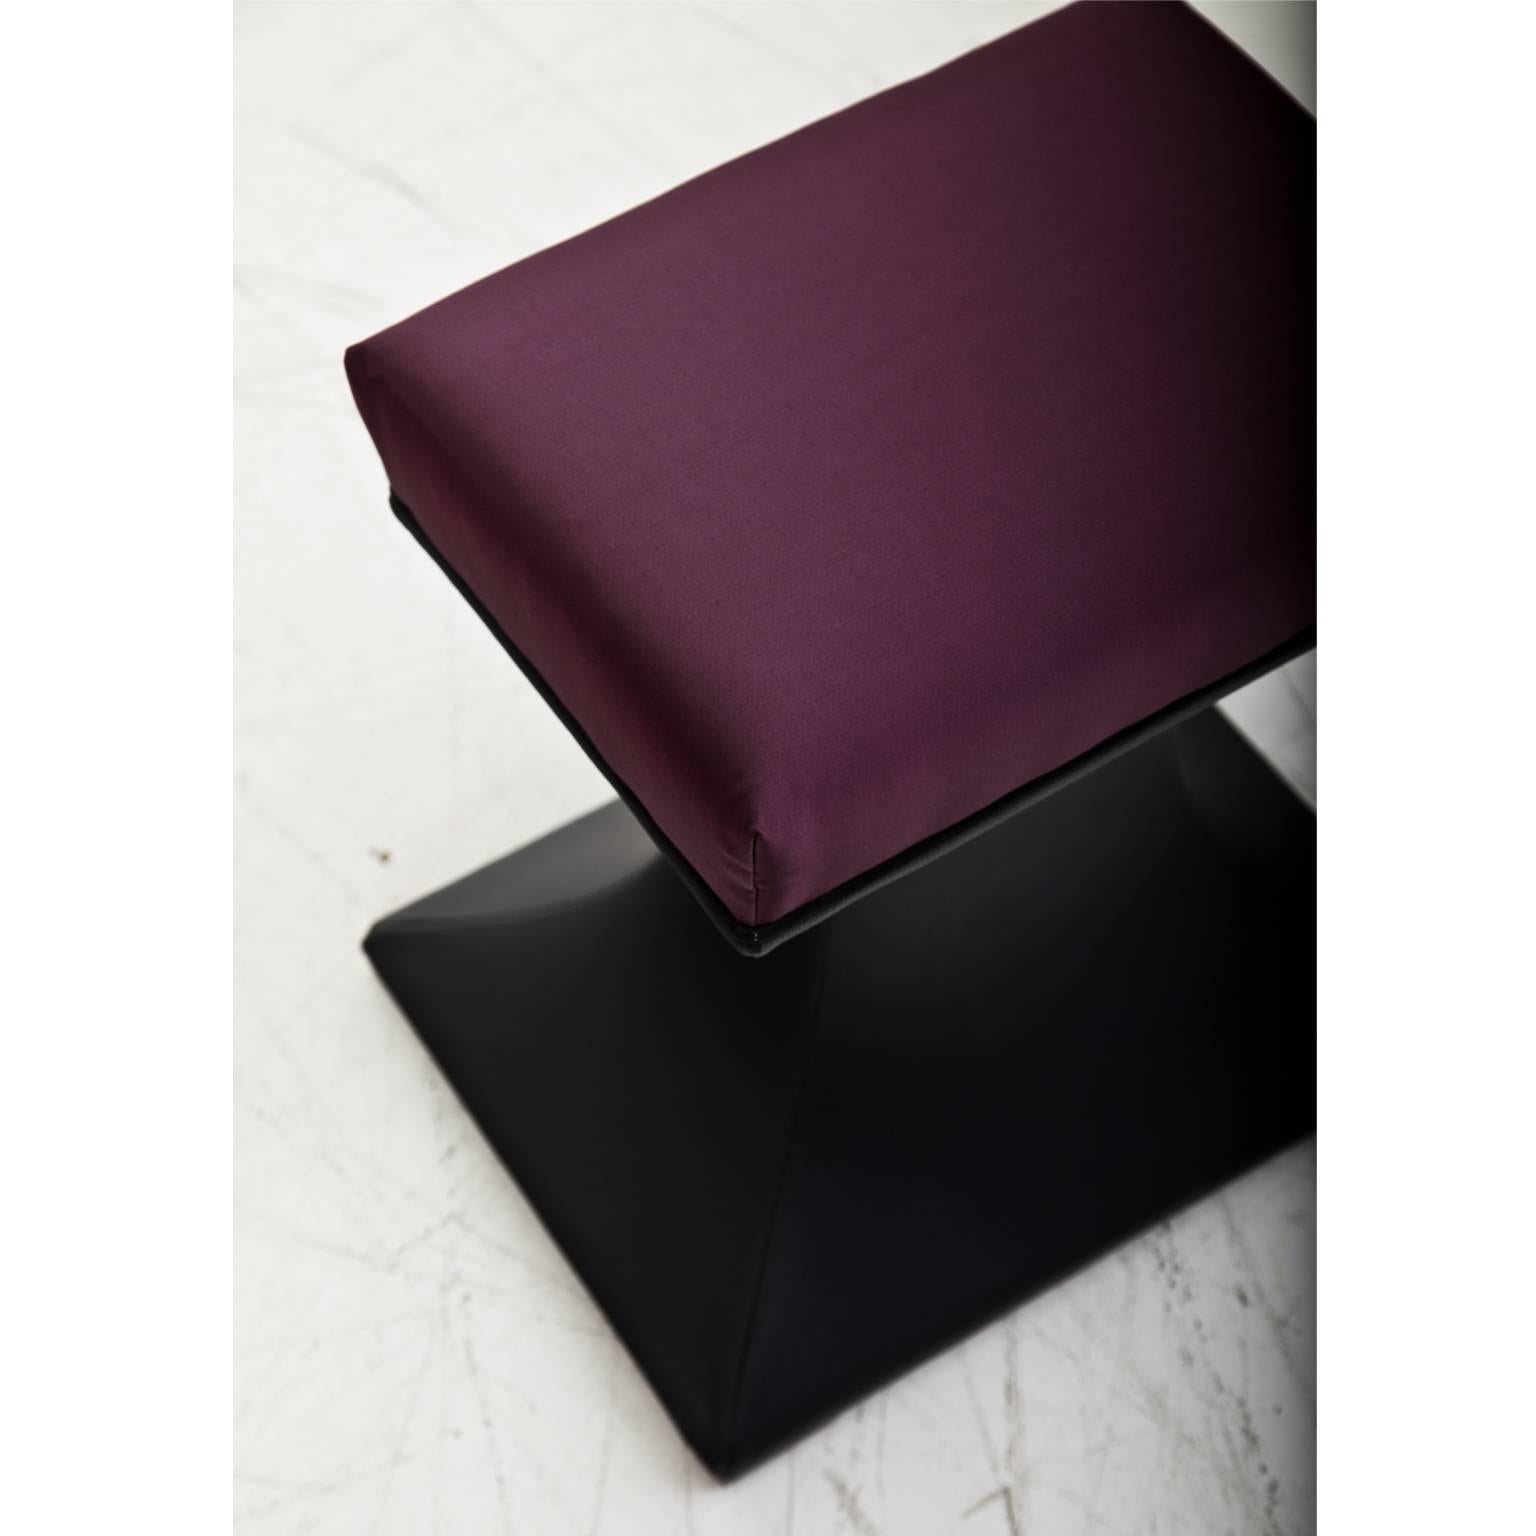 Pair of stools on rectangular concave feet. These are covered with black leather, the seats are newly upholstered with a high quality fabric.